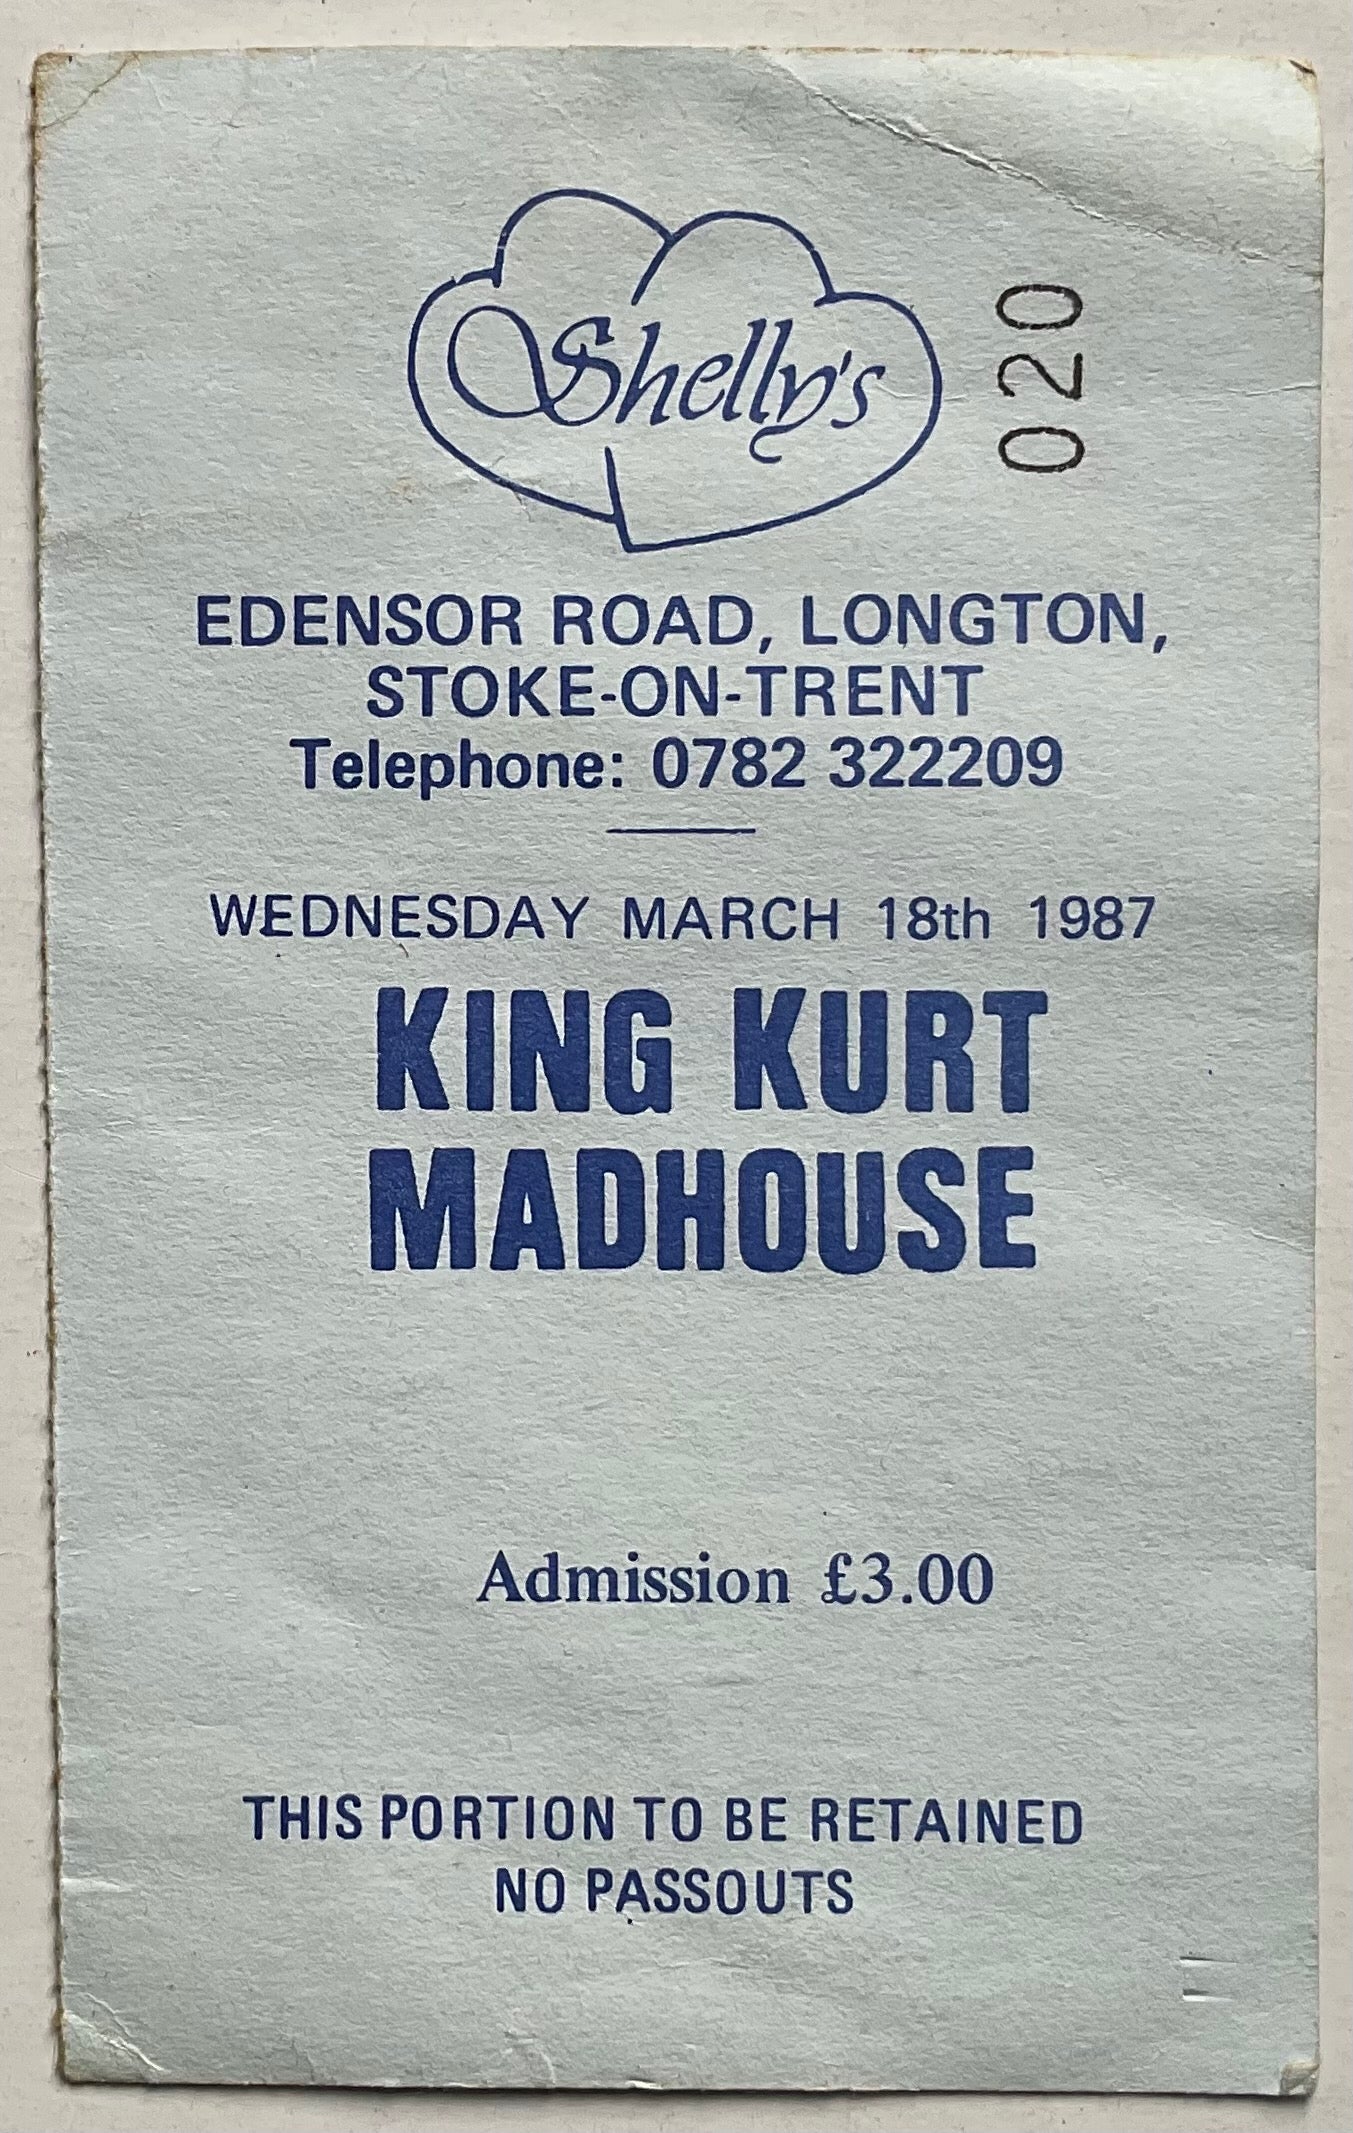 King Kurt Madhouse Original Used Concert Ticket Shelly’s Stoke on Trent 18th Mar 1987